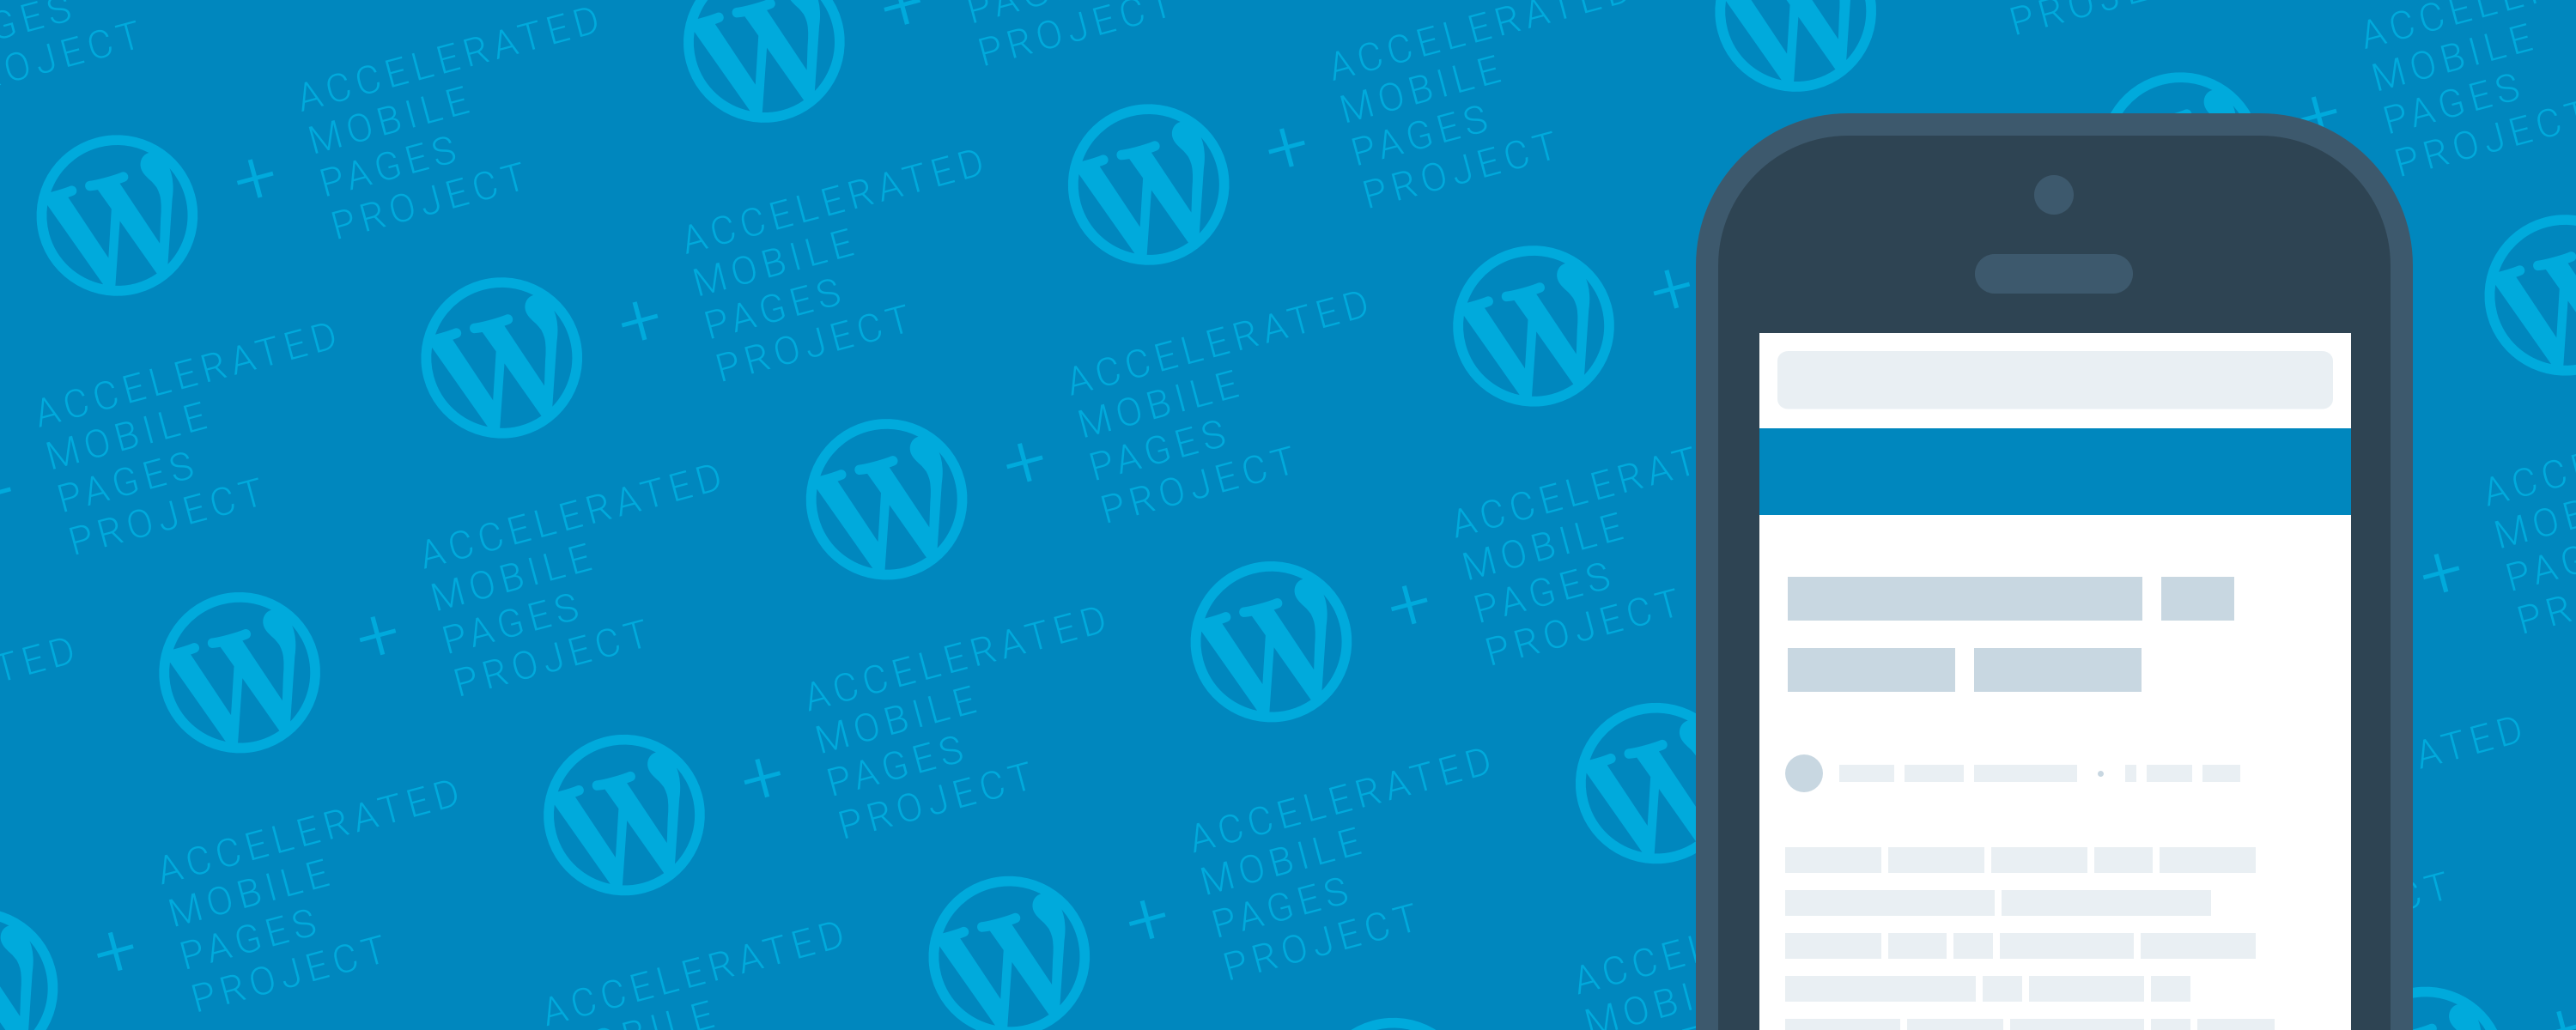 WordPress Sites Now Support Google’s AMP to Make Mobile Pages Load Faster